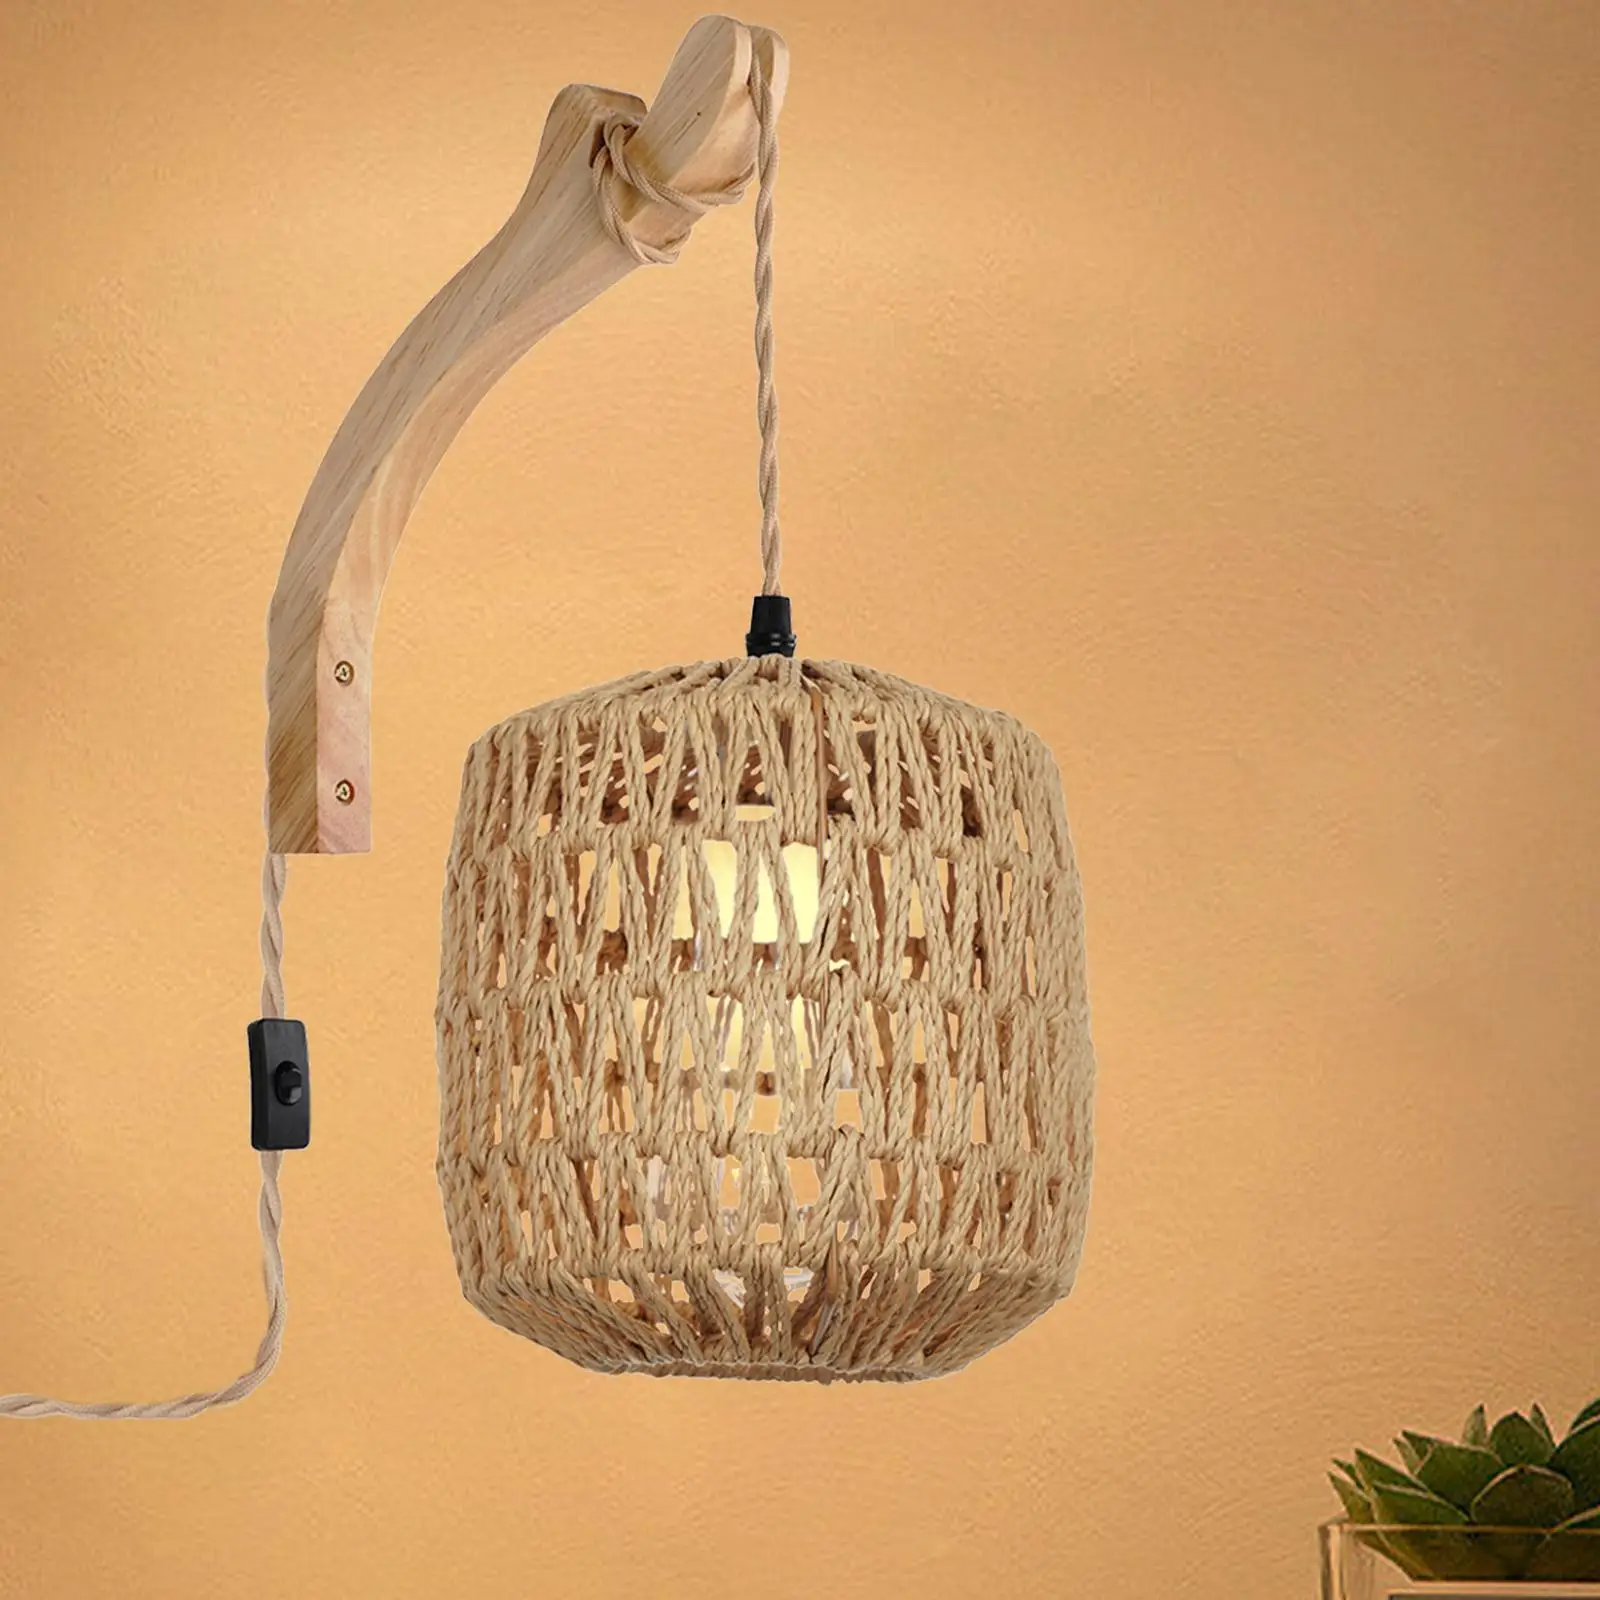 Wall Sconce Adjustable Cord Handwoven Lampshade Rustic Wall Lamp with Wood Arm for Dining Room Bedroom Bedside Kitchen Decor